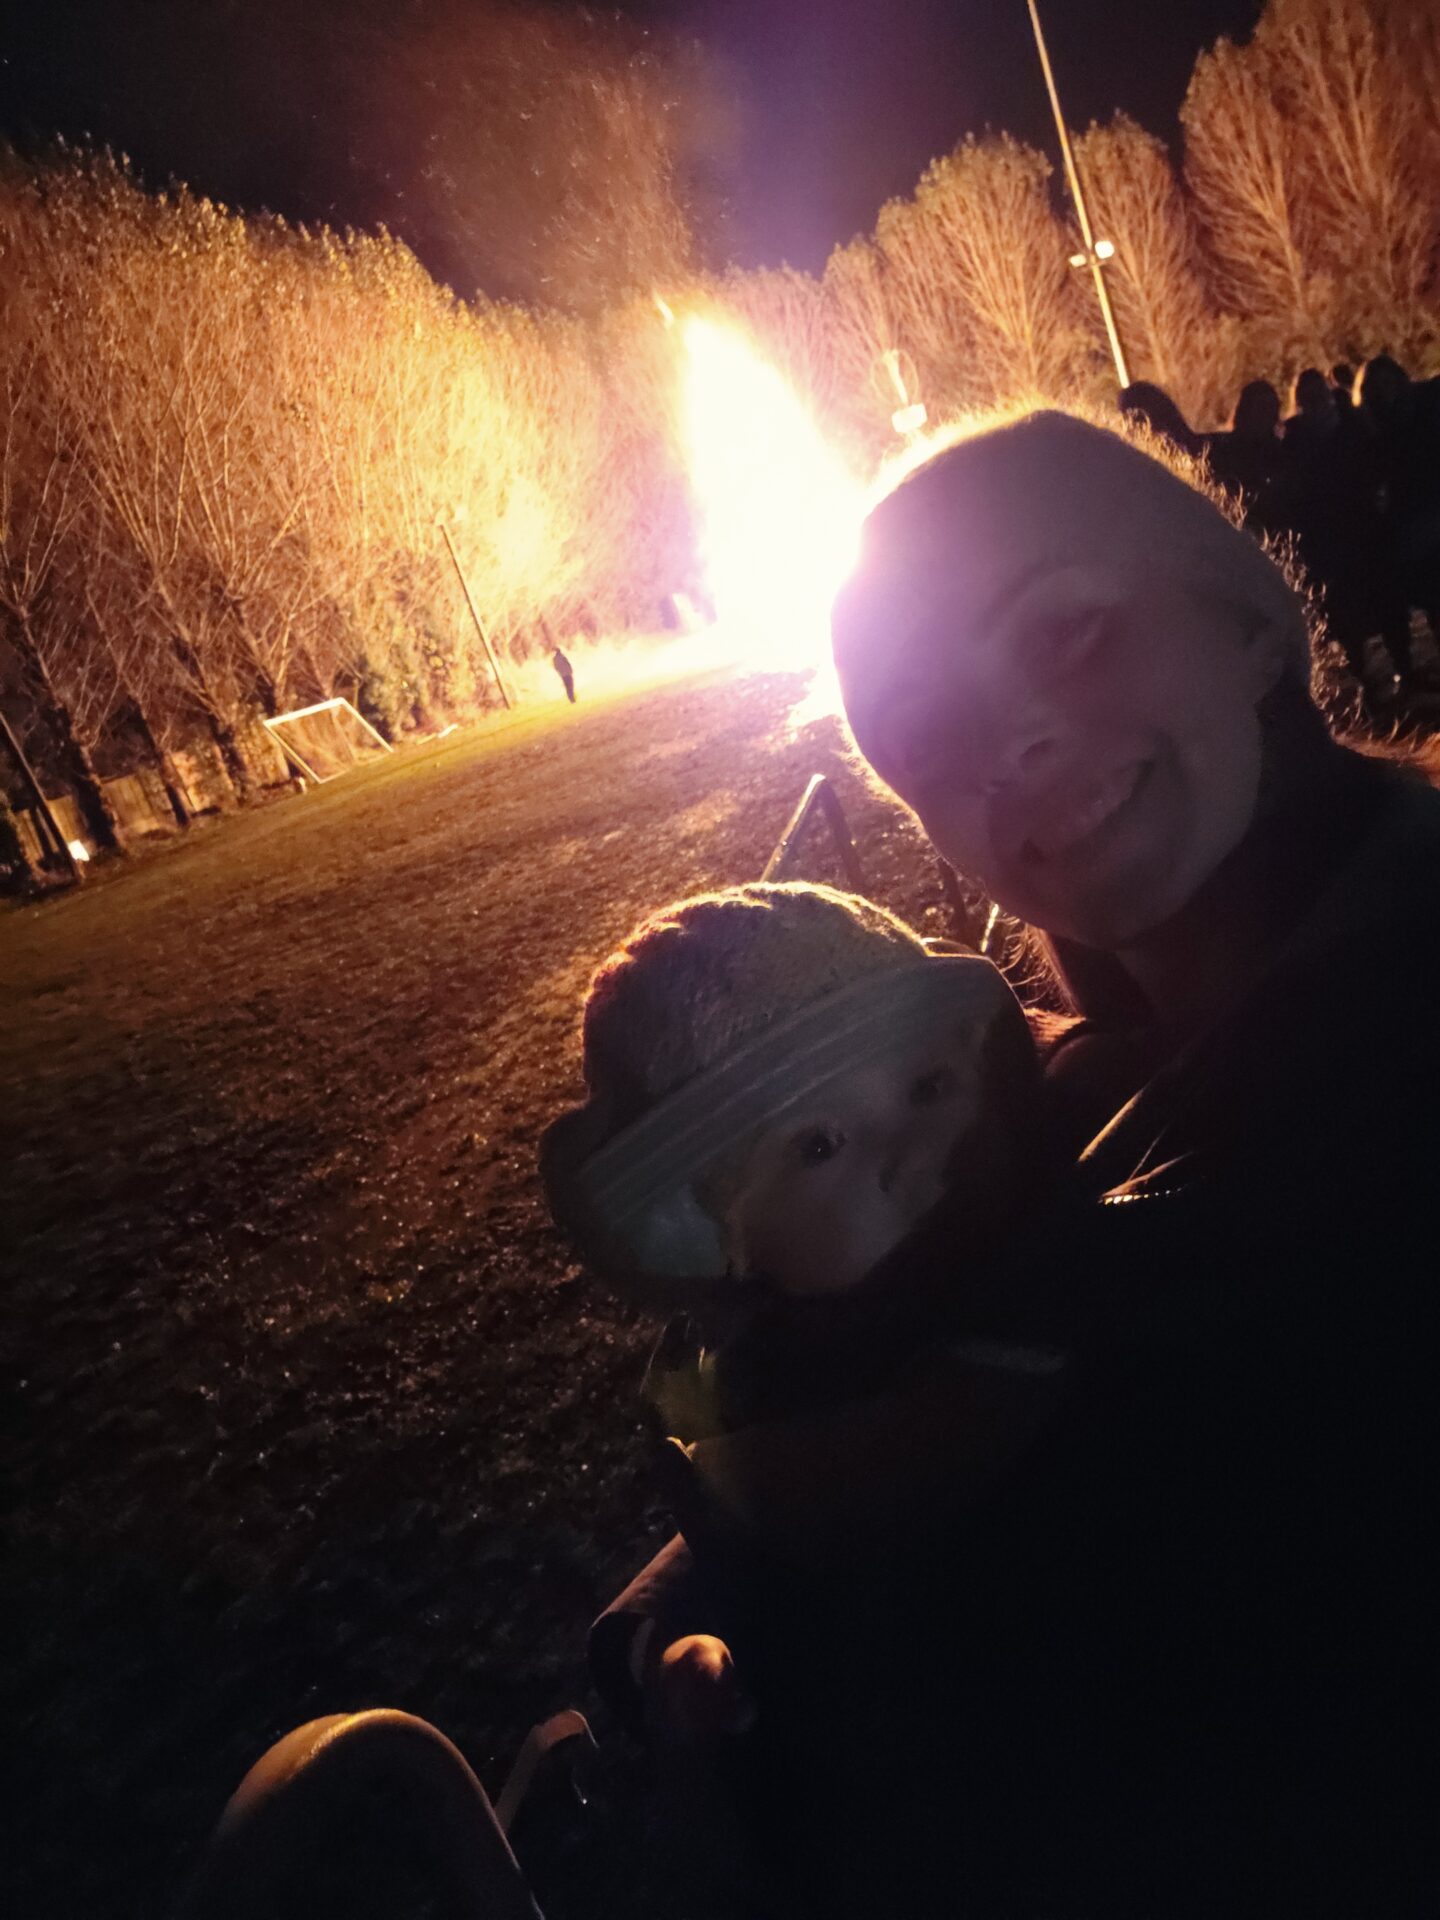 Night time image showing a woman carrying a baby in a sling facing the camera. Their faces are dark and behind them is a large glowing bonfire. 